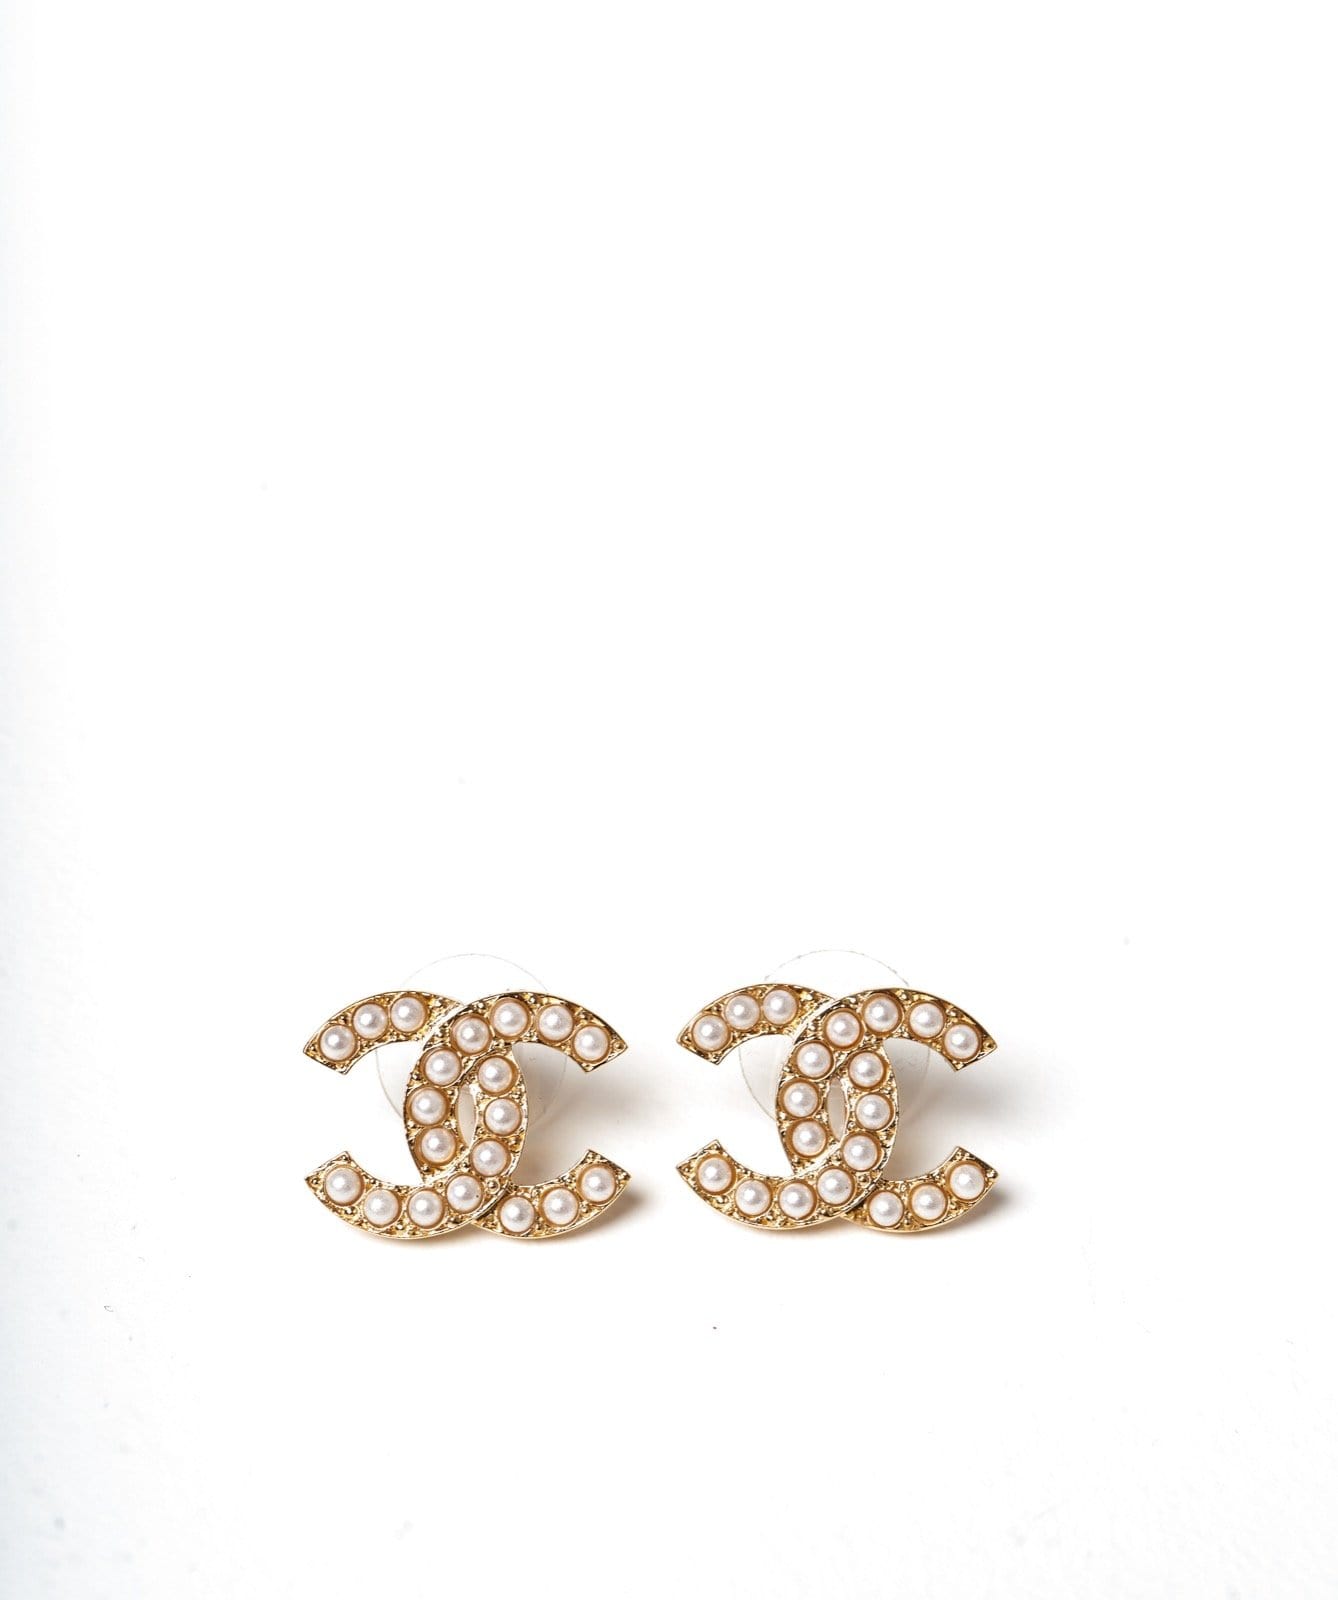 Chanel Chanel CC yellow gold and pearl earrings